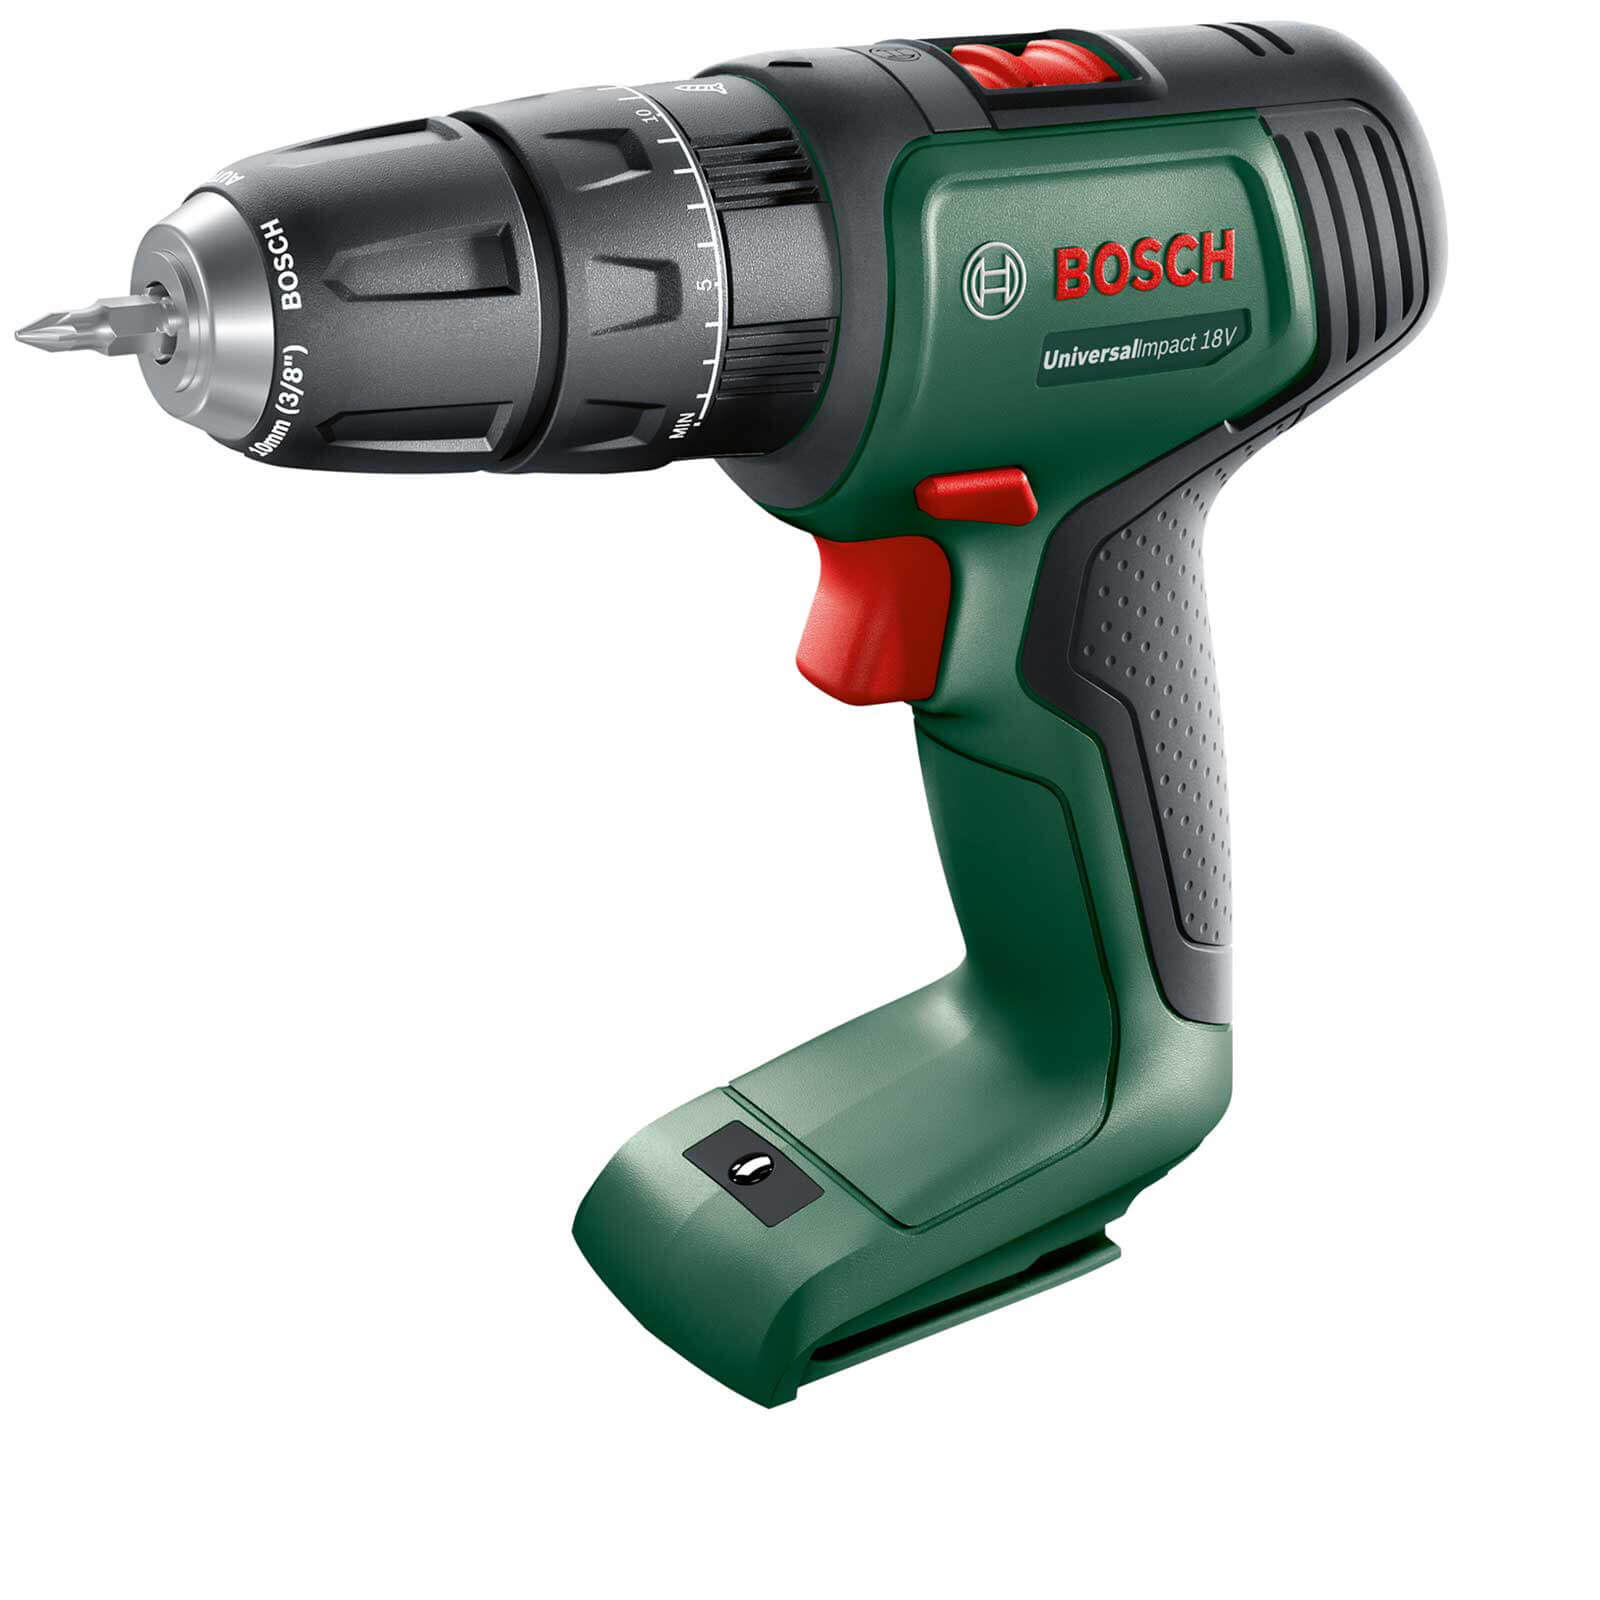 Image of Bosch UNIVERSALIMPACT 18v Cordless Combi Drill No Batteries No Charger No Case